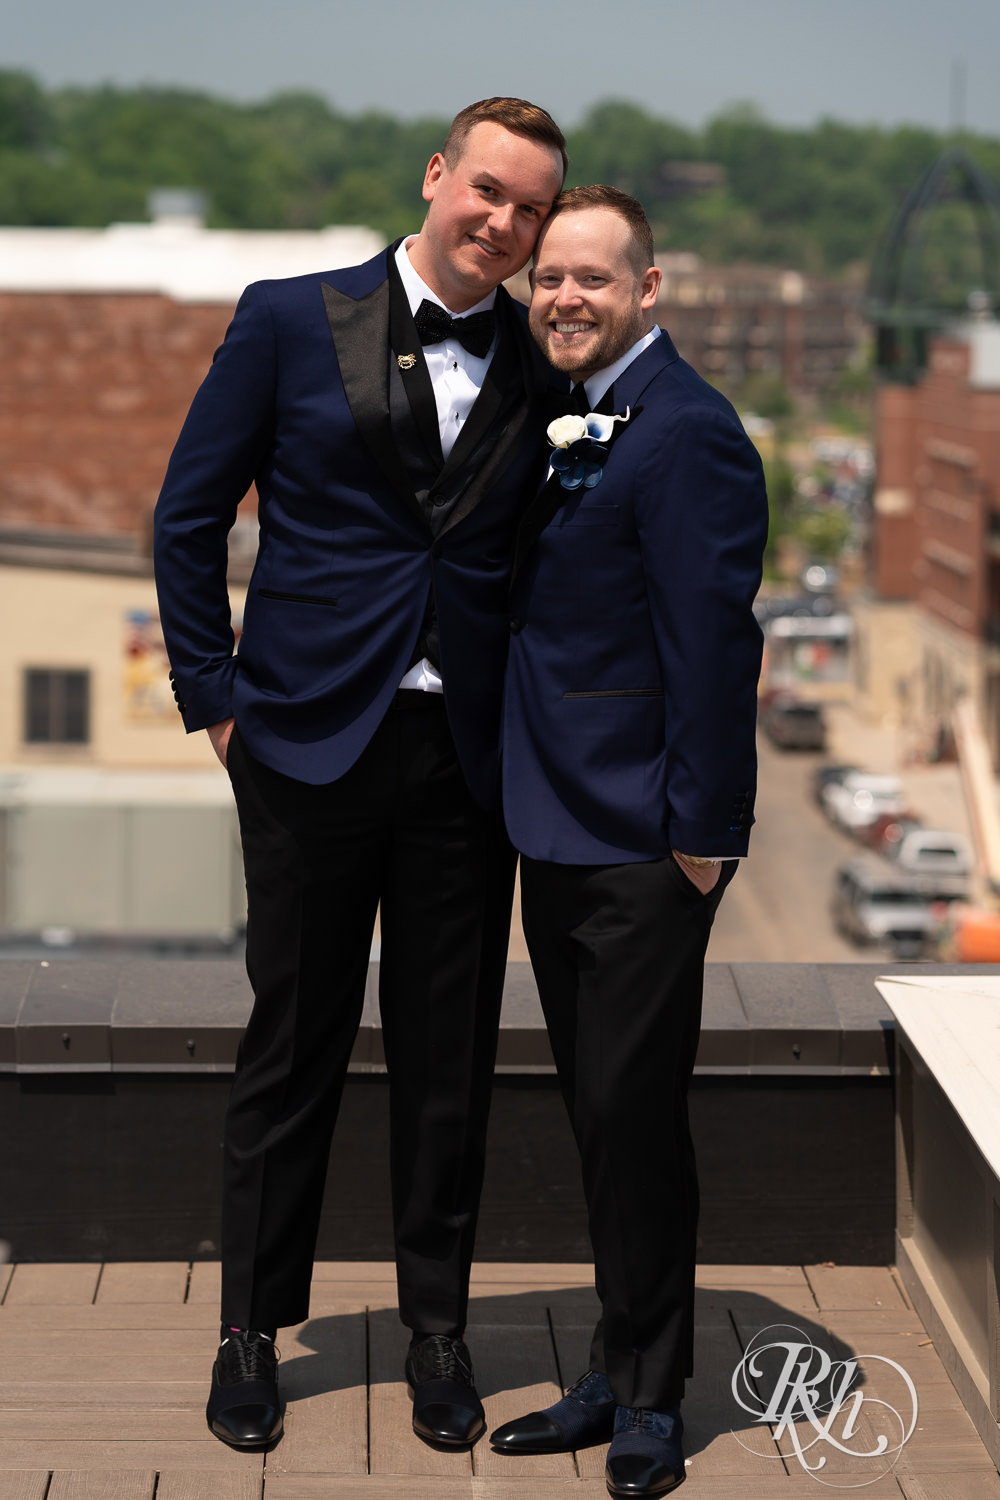 Grooms in blue suits smile on rooftop before gay wedding in Stillwater, Minnesota.